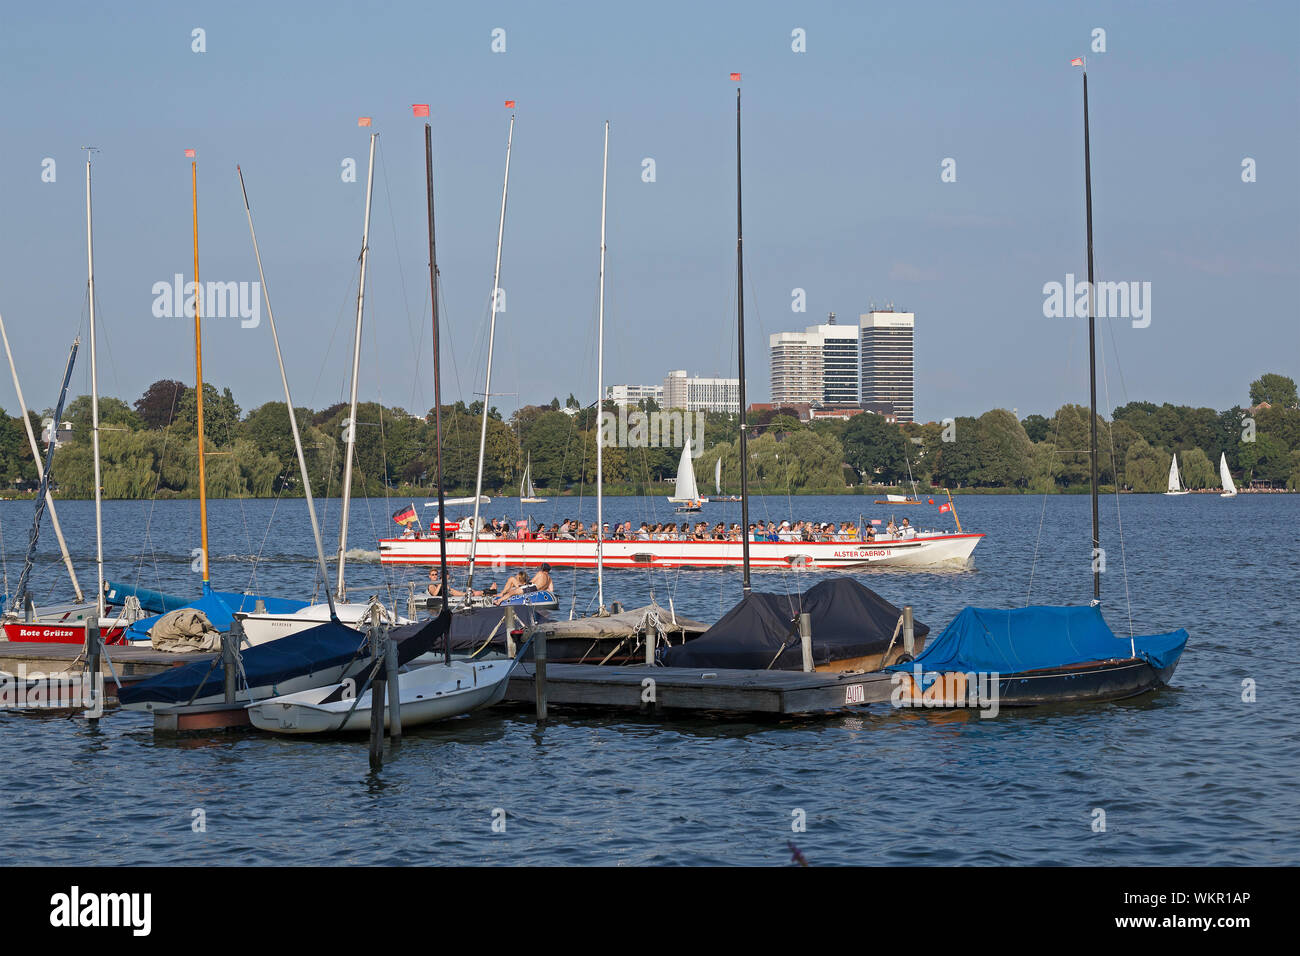 excursion boat, marina at the Western lakefront, Outer Alster, Hamburg, Germany Stock Photo